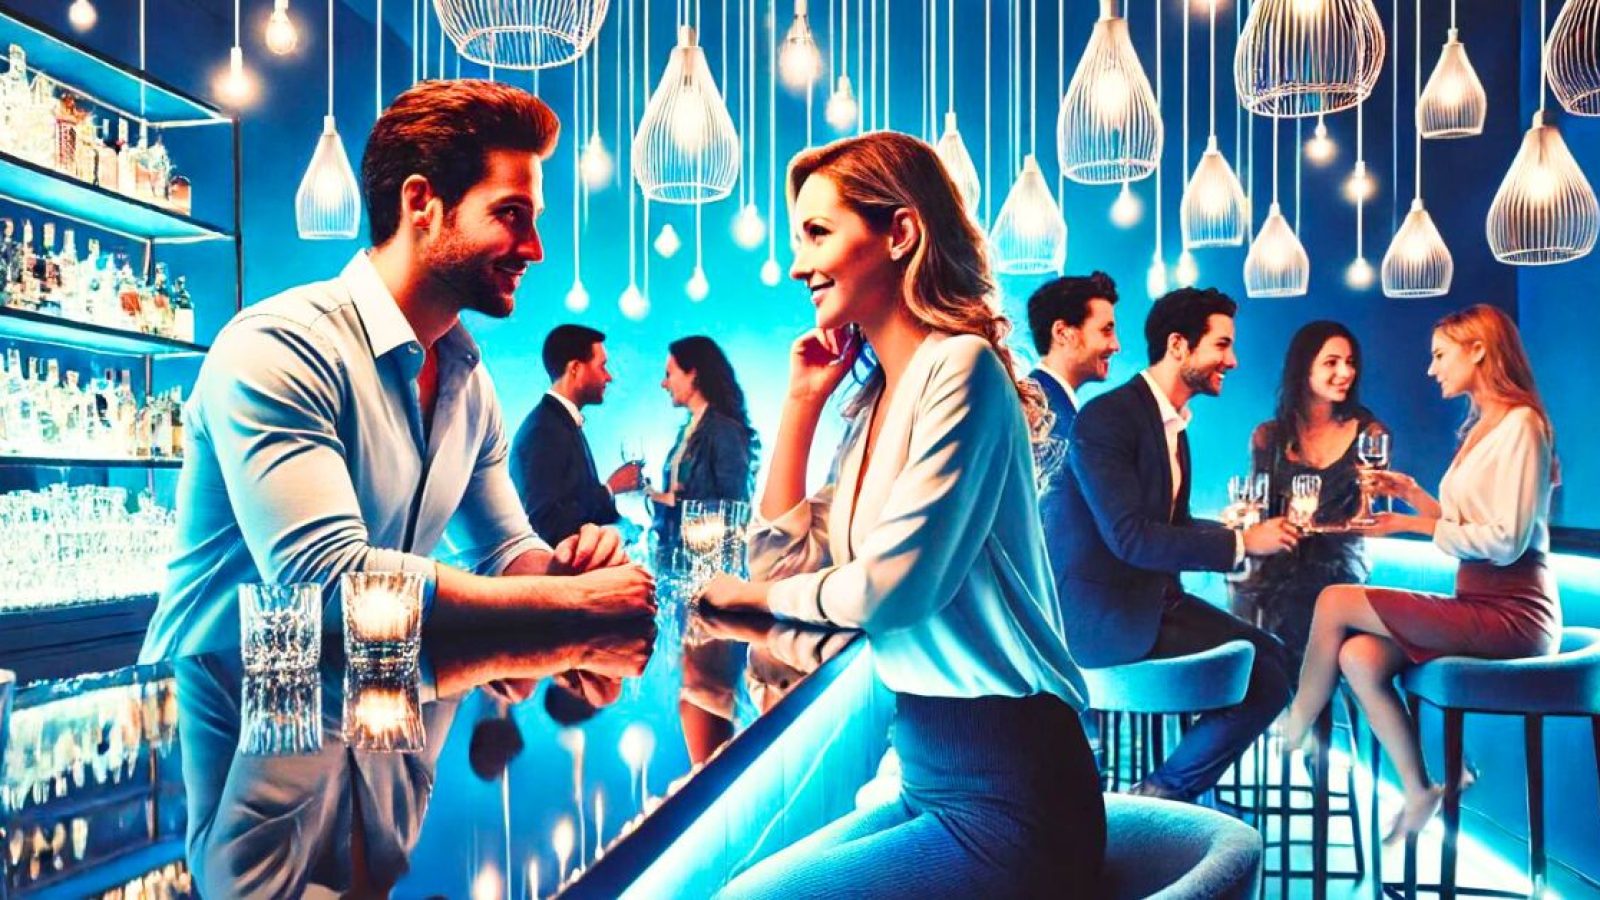 man and woman flirting on a blind date in a bar